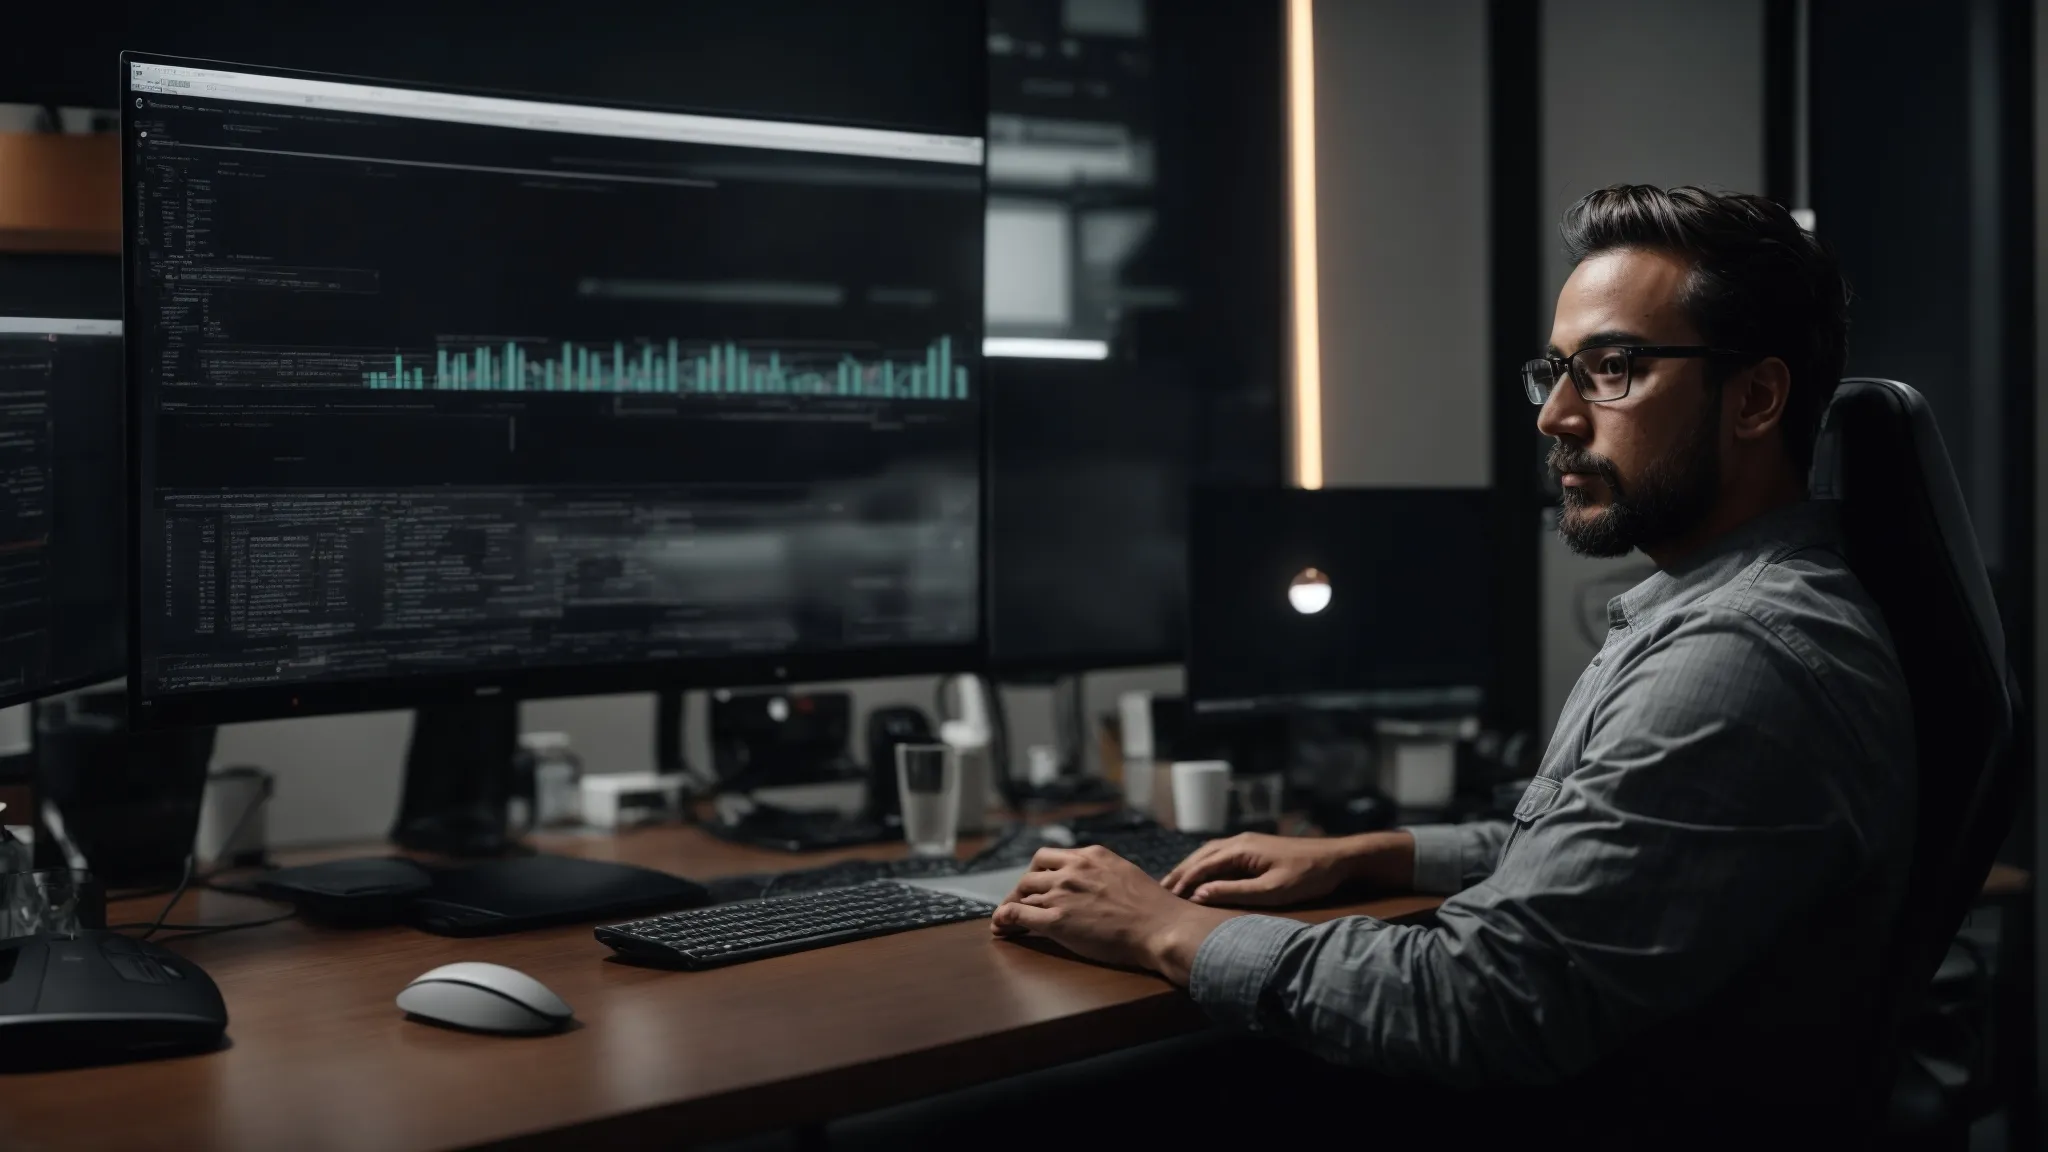 a website developer sits before dual monitors, immersed in optimizing a website's architecture for enhanced performance and search engine visibility.